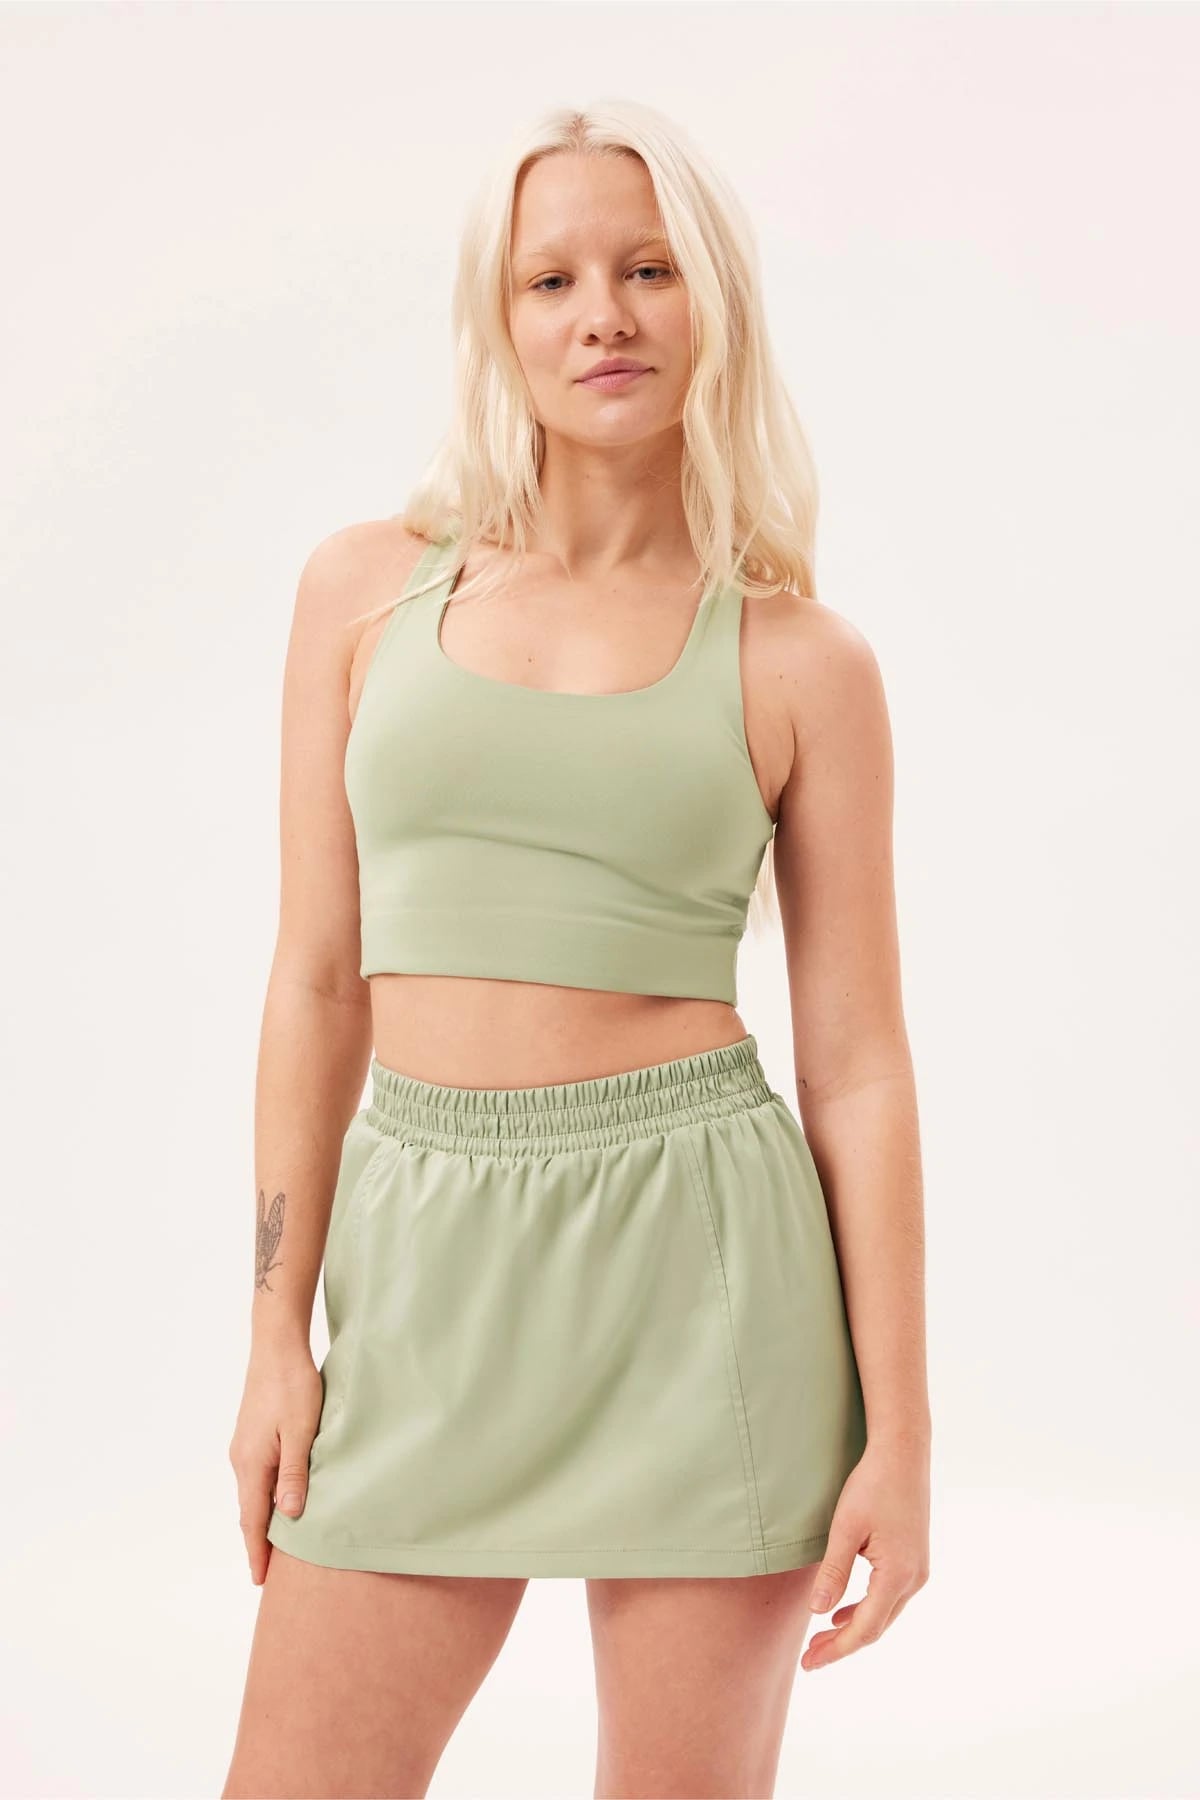 Girlfriend Collective Womens Square Neck Medium Support Tommy Bra - Green